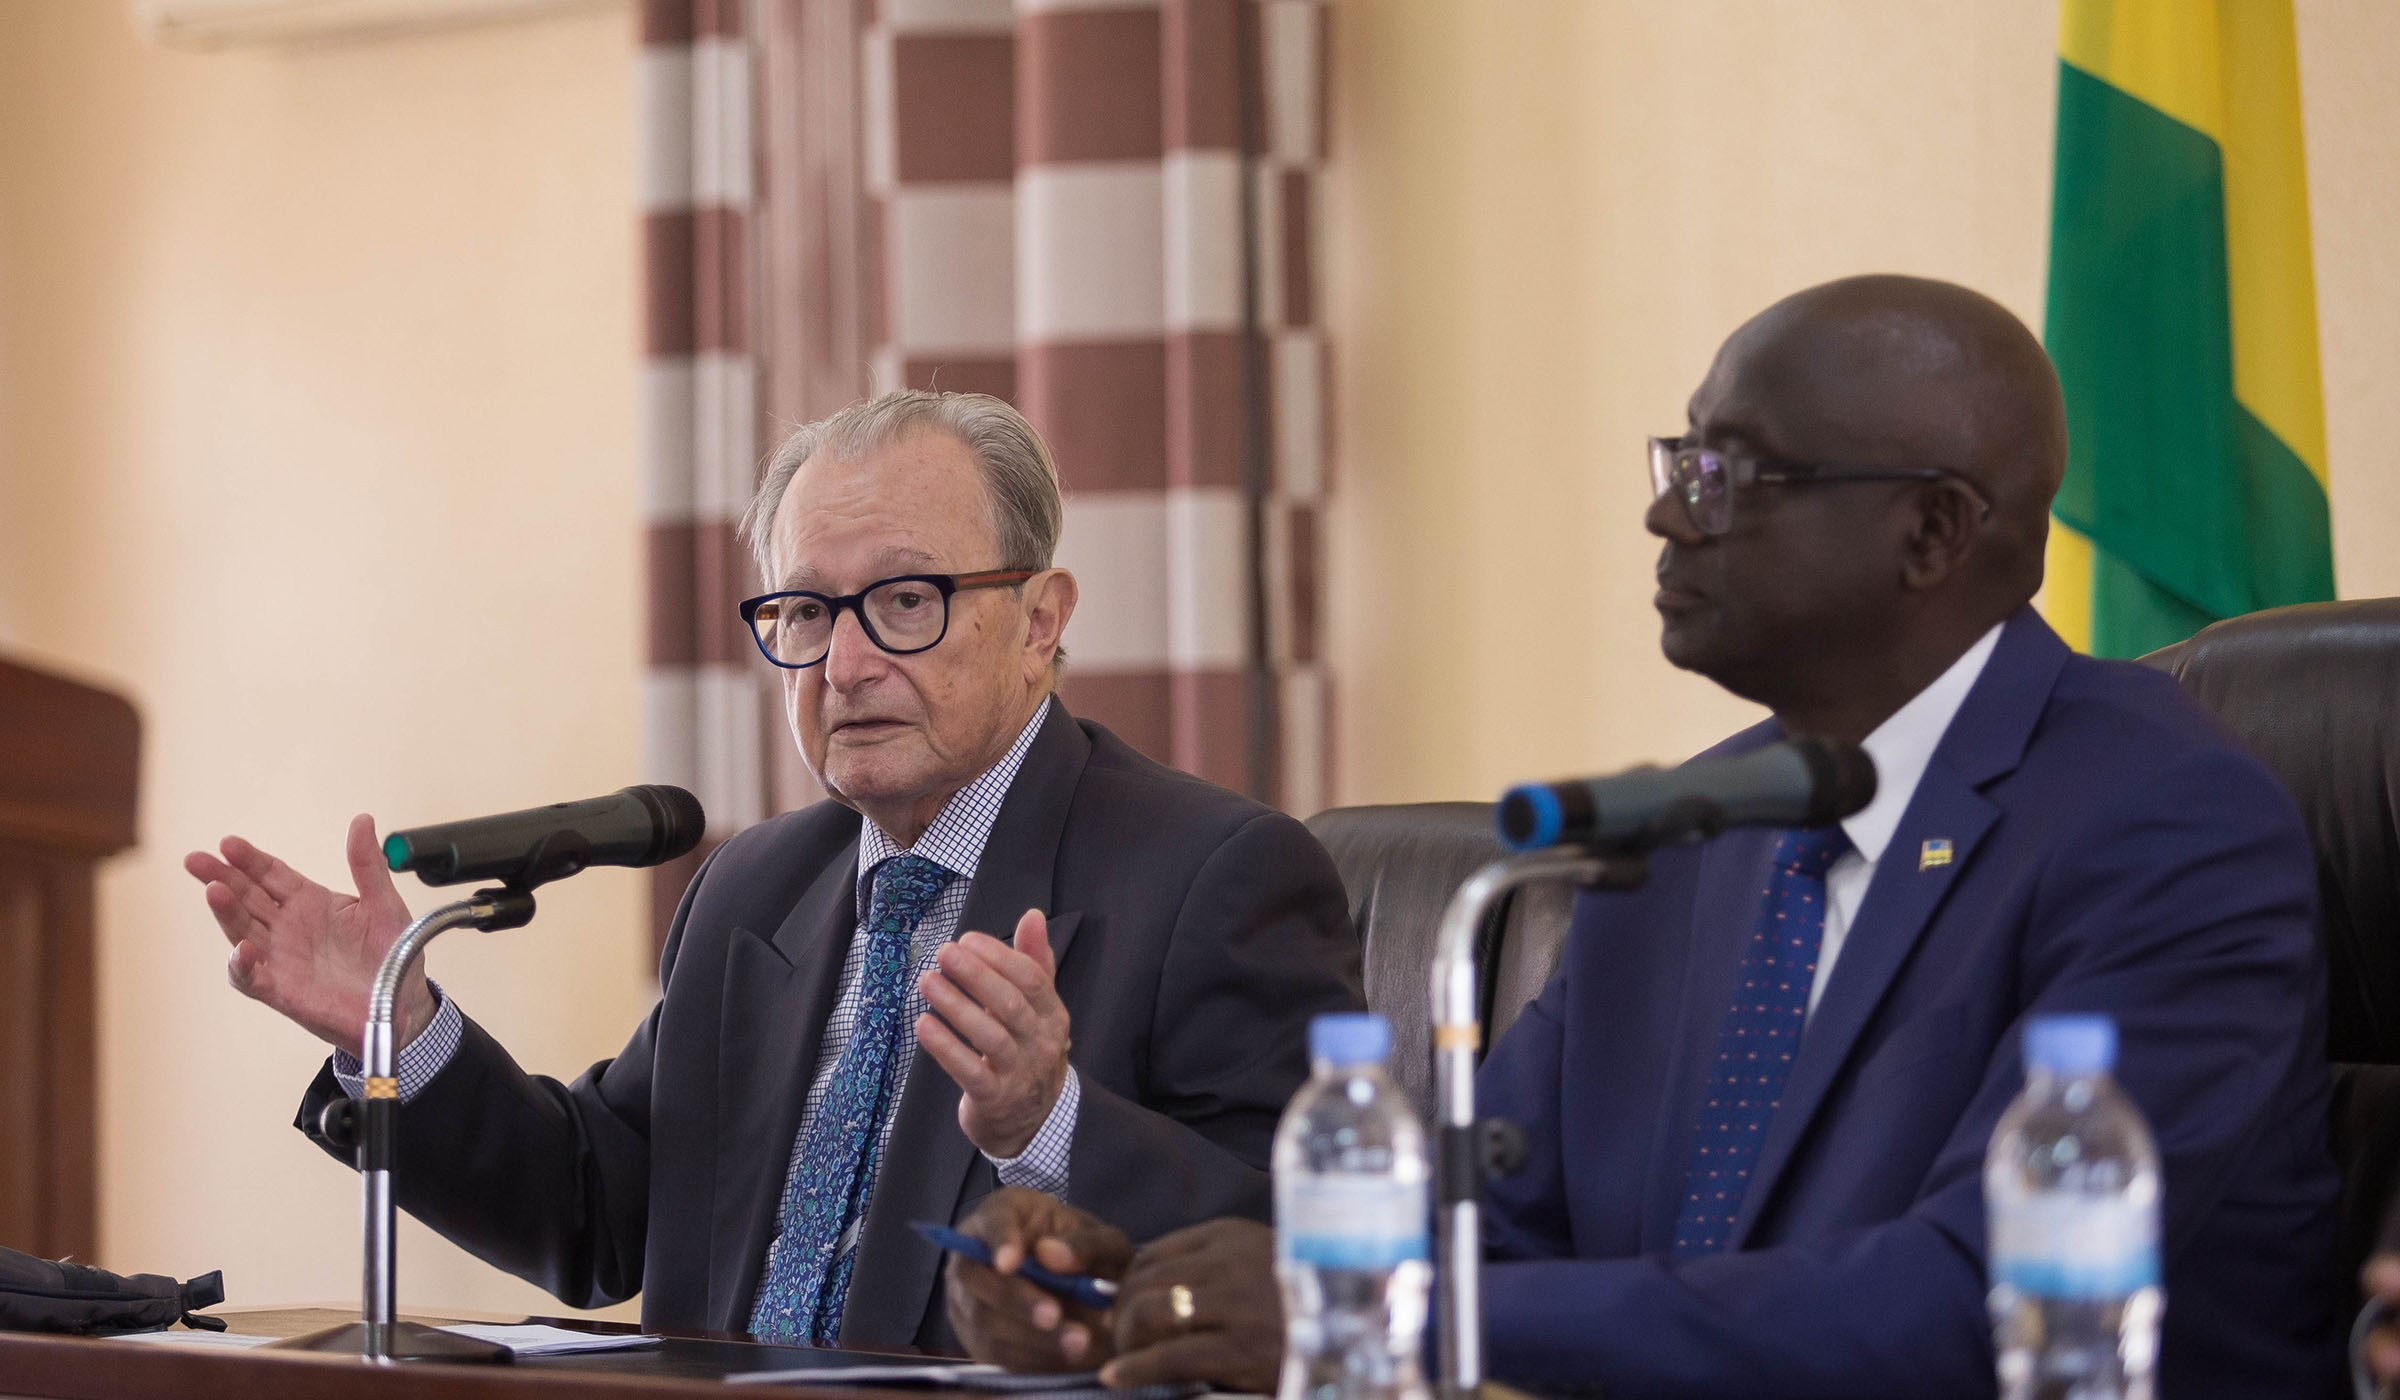 Judge Agius Carmel speaks during the meeting with Minister of Justice Johnston Busingye yesterday during his visit at the ministry. Nadege Imbabazi.